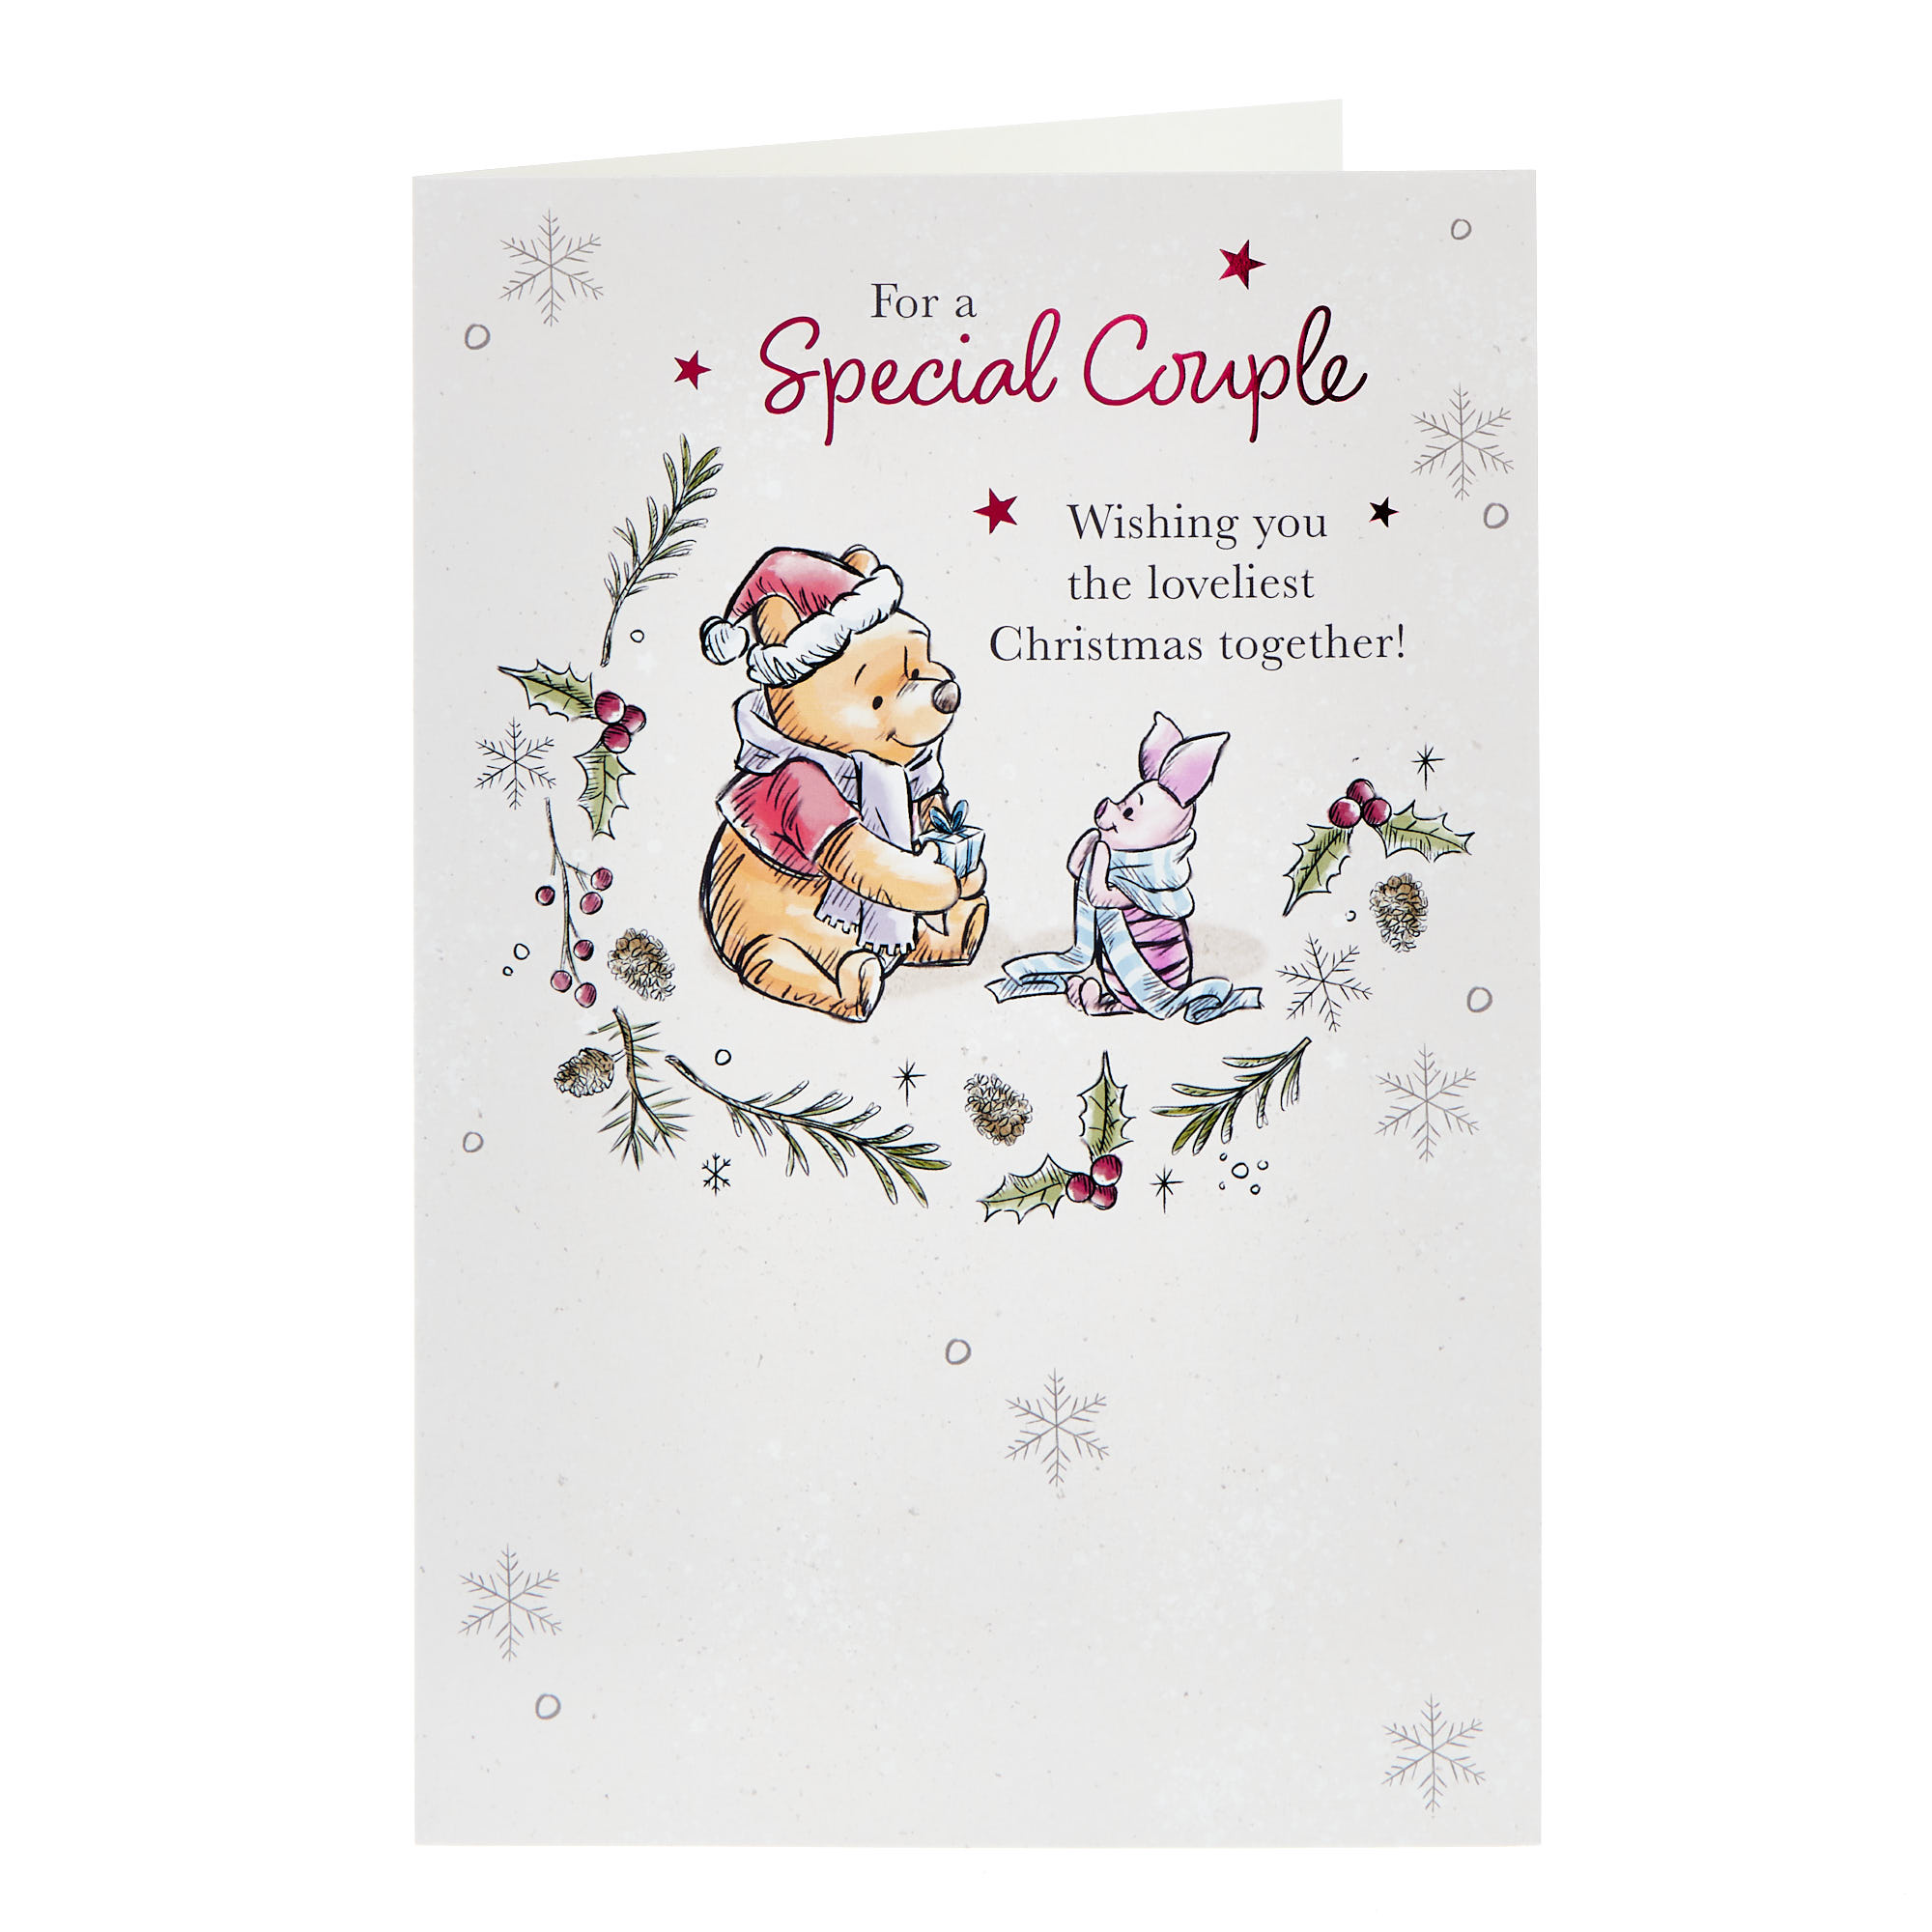 Special Couple Winnie The Pooh Christmas Card